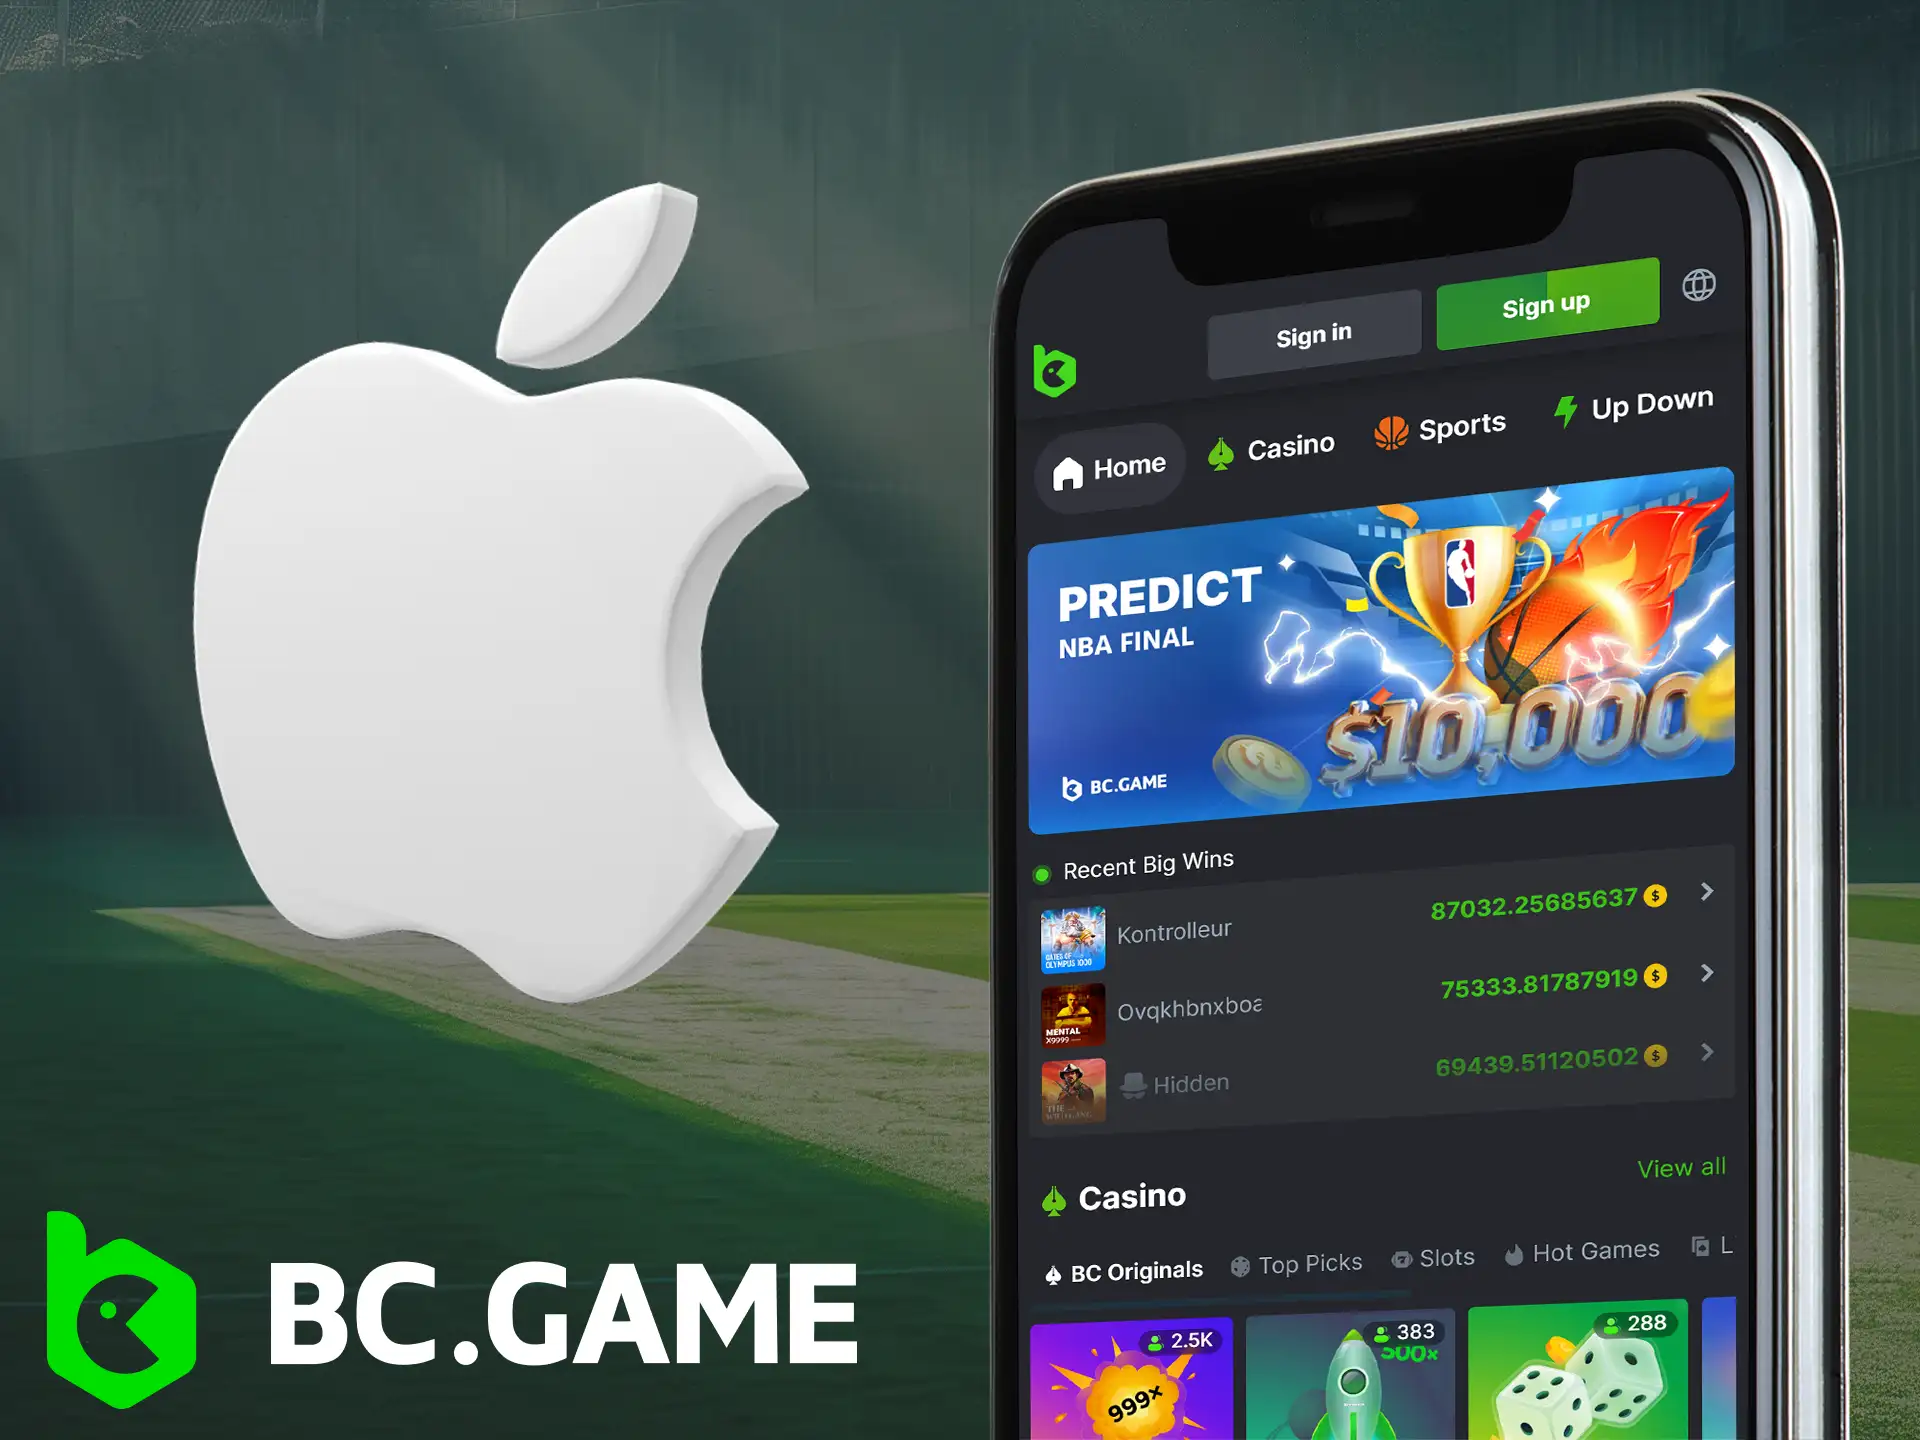 The BC Game mobile application is available for iOS users, download the app file and place bets and play online casinos on your smartphone